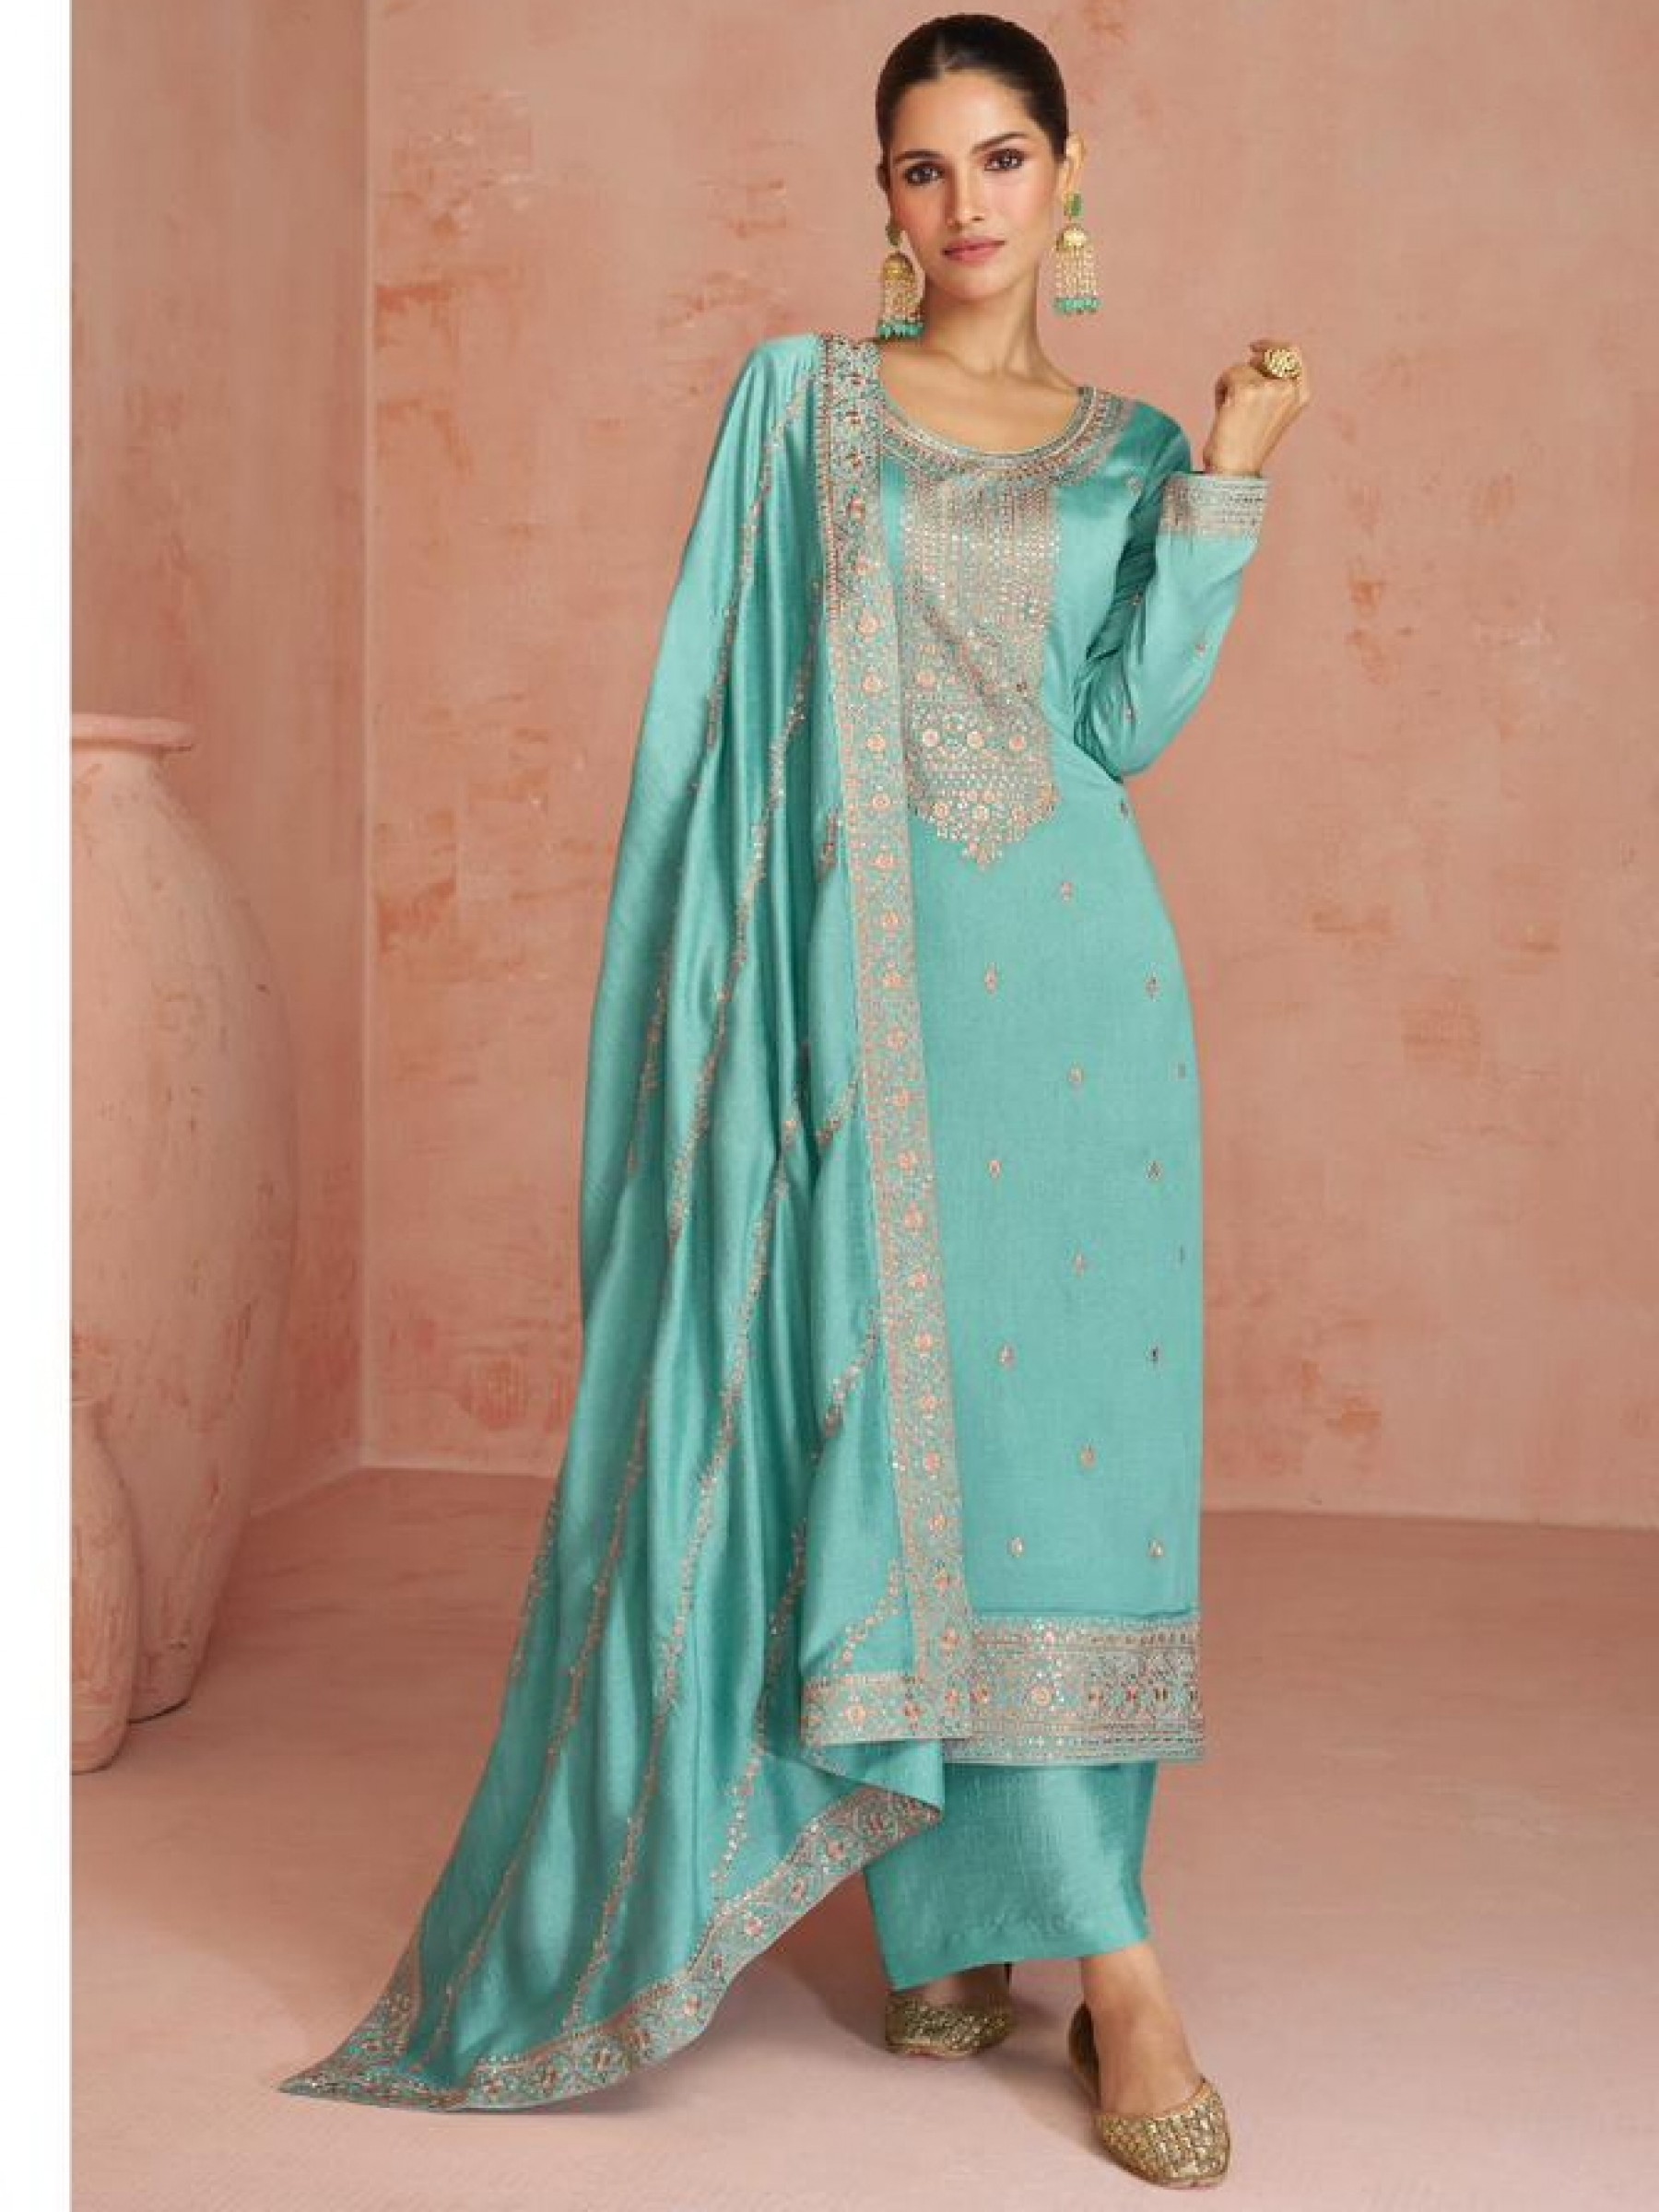 Premium Silk  Party Wear Suit  in Turquoise Color with  Embroidery Work